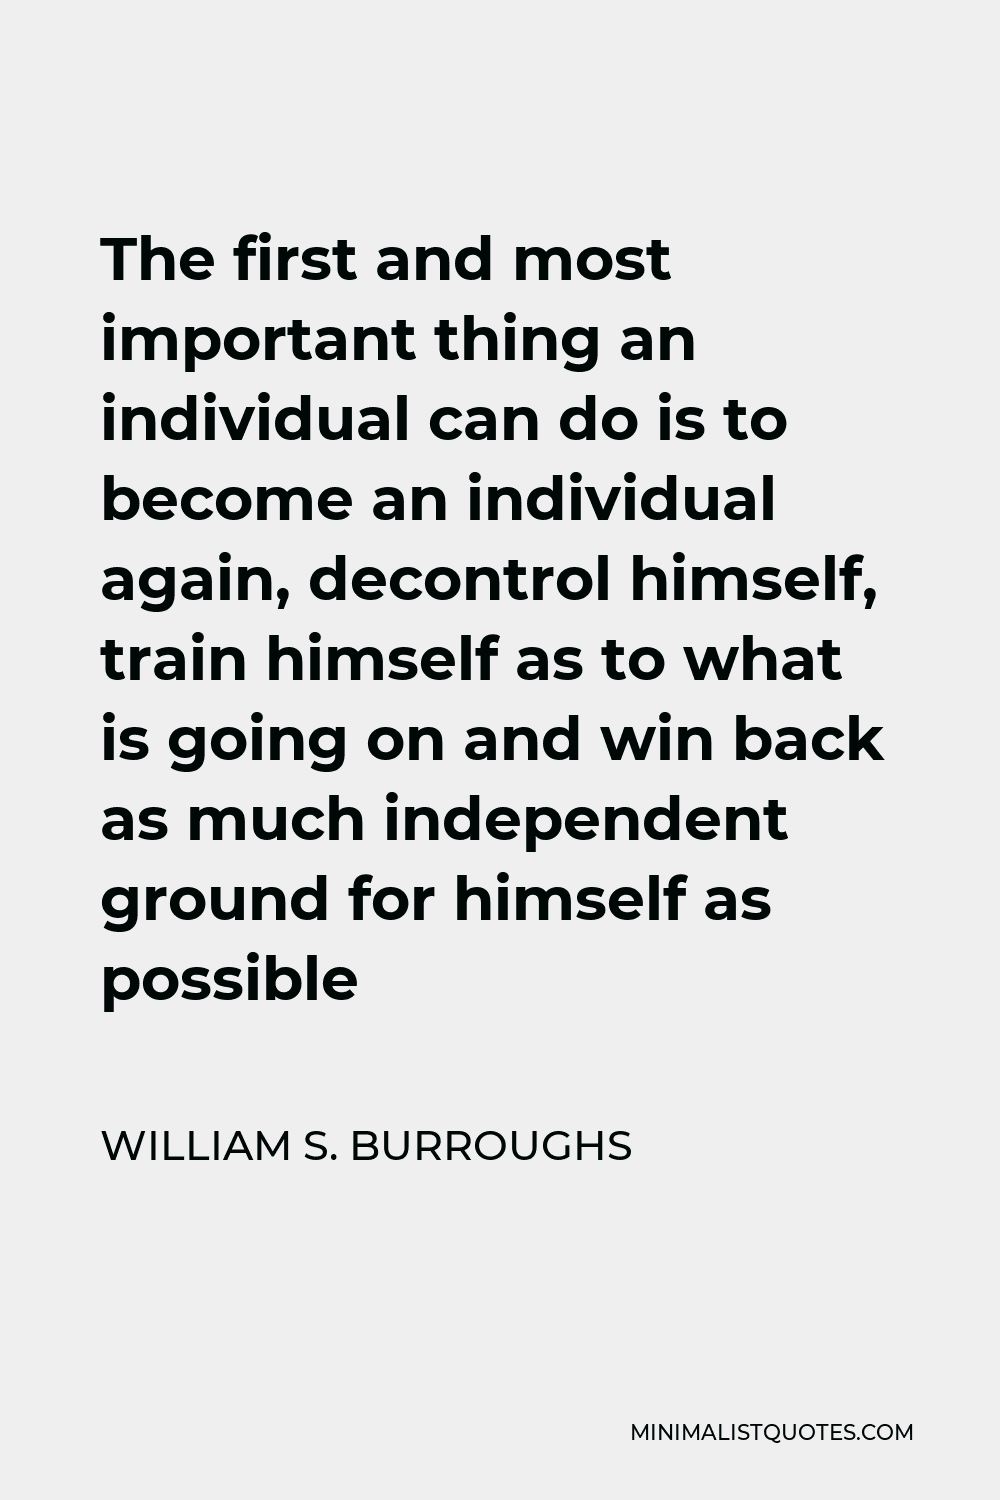 William S. Burroughs Quote - The first and most important thing an individual can do is to become an individual again, decontrol himself, train himself as to what is going on and win back as much independent ground for himself as possible